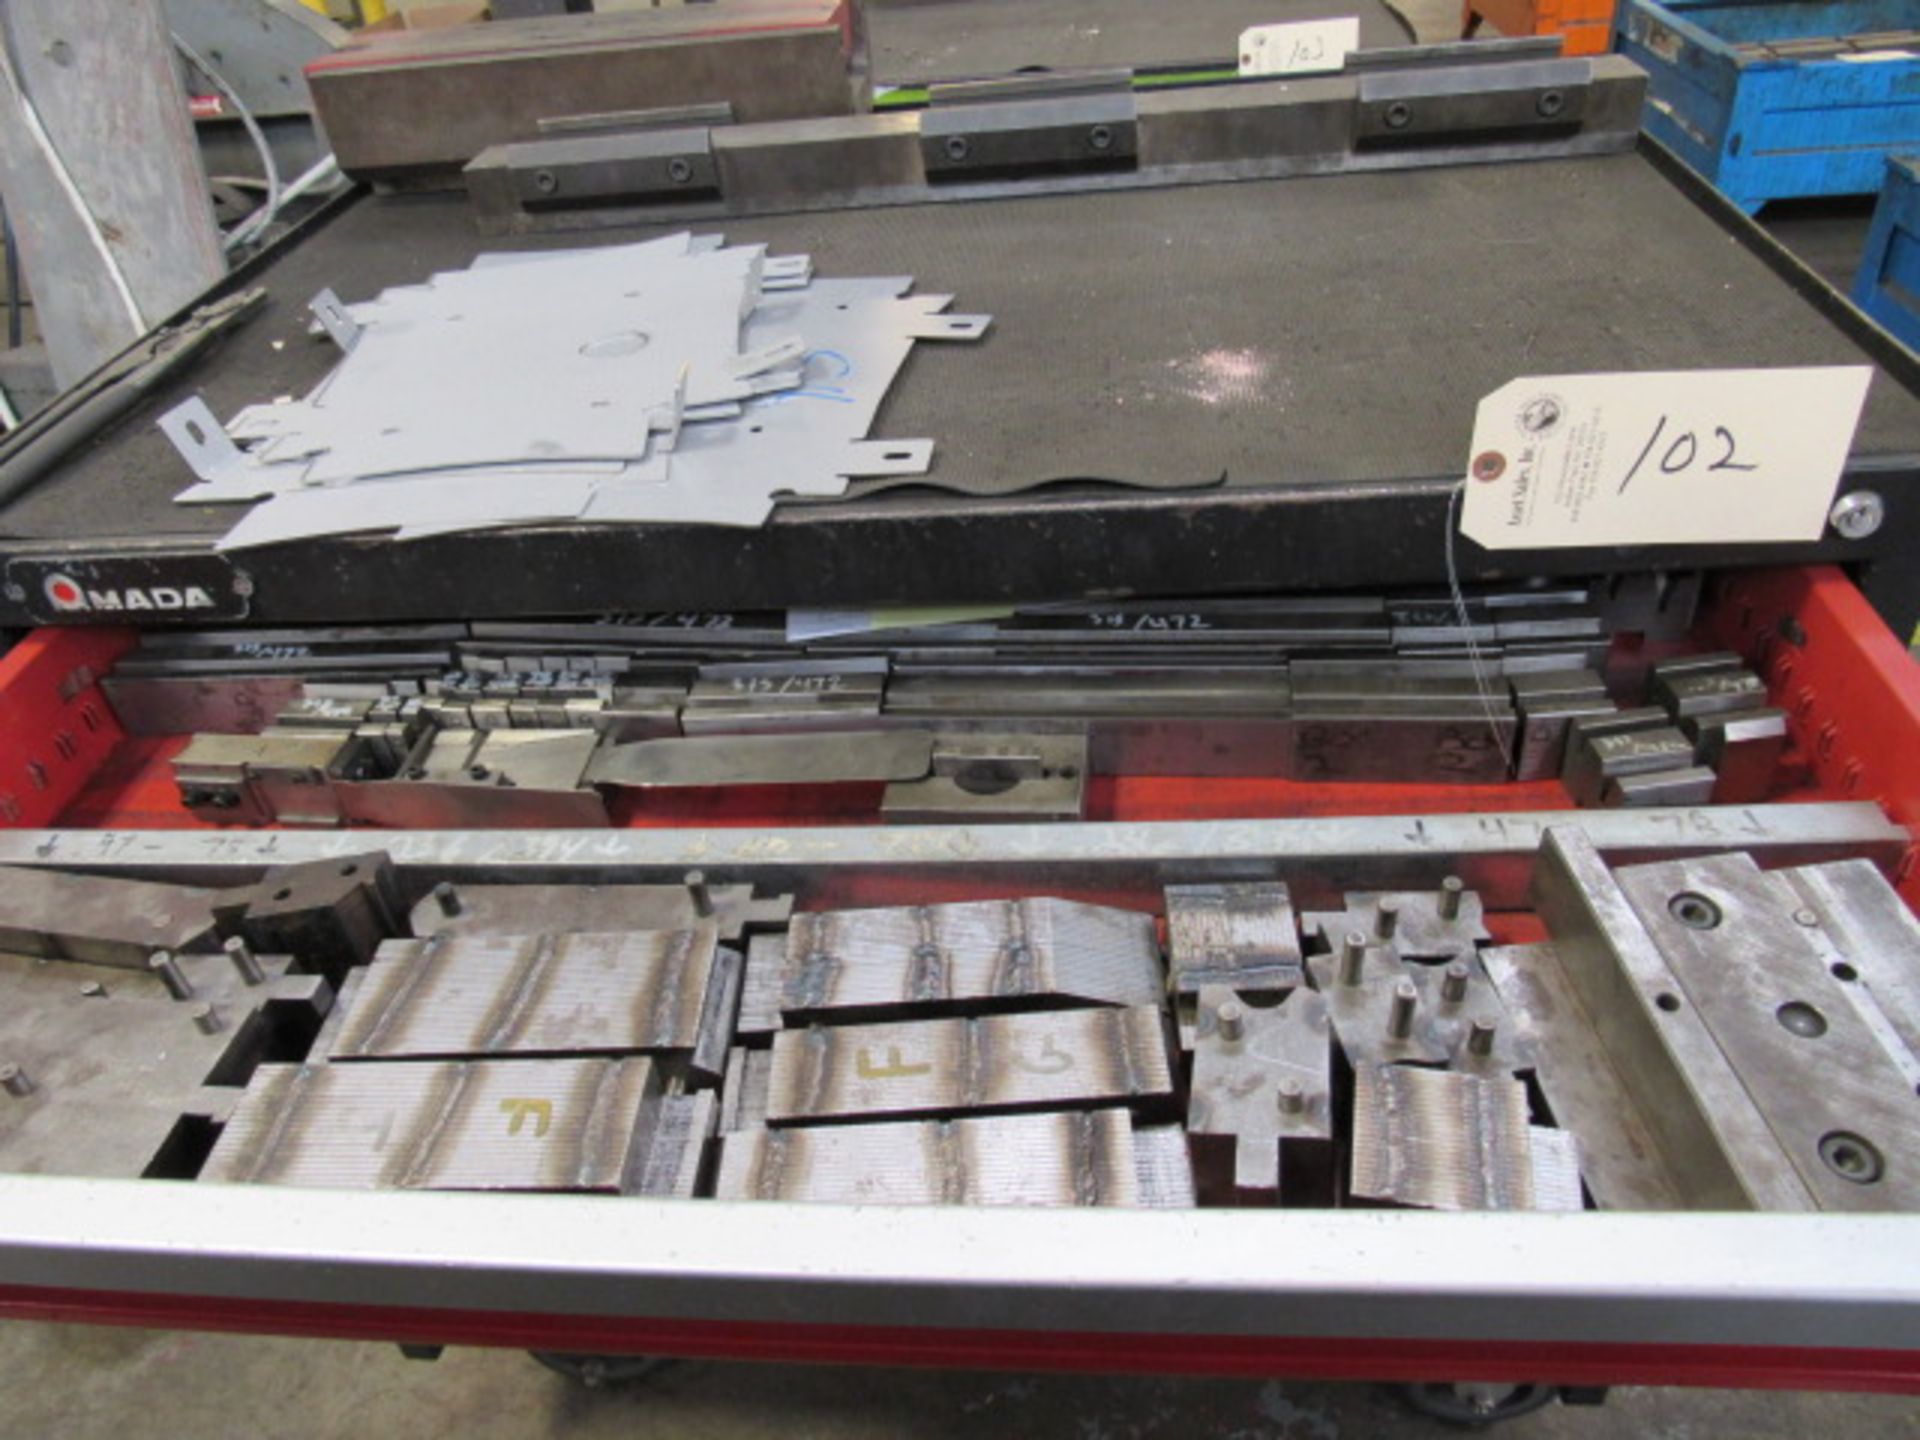 Amada 5 Drawer Portable Cabinet with Press Brake Dies - Image 7 of 7